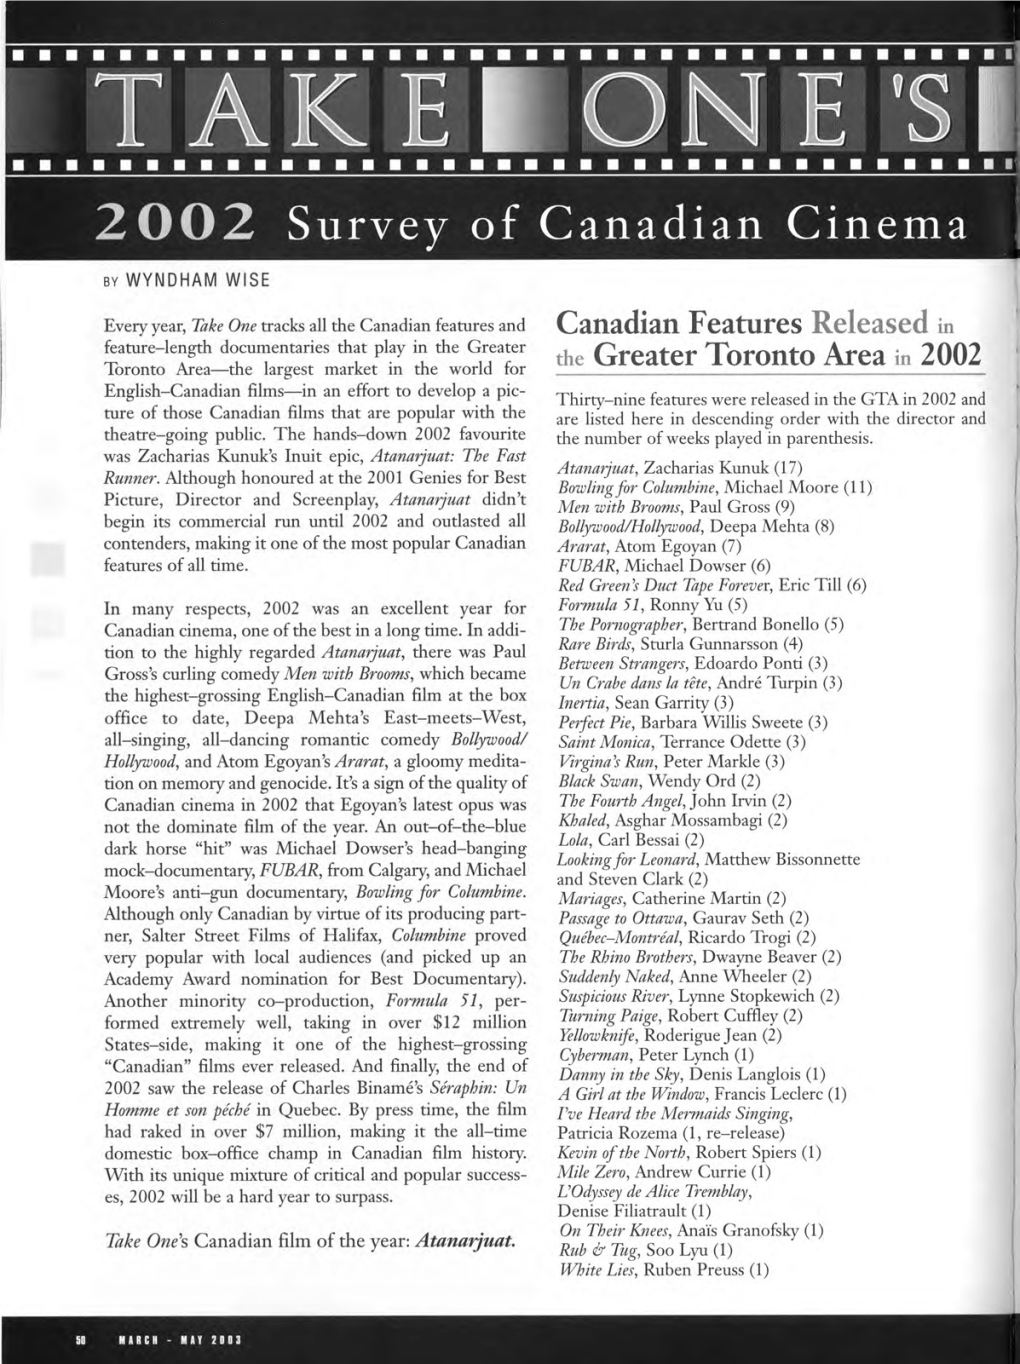 Canadian Features Released in the Greater Toronto Area in 2002